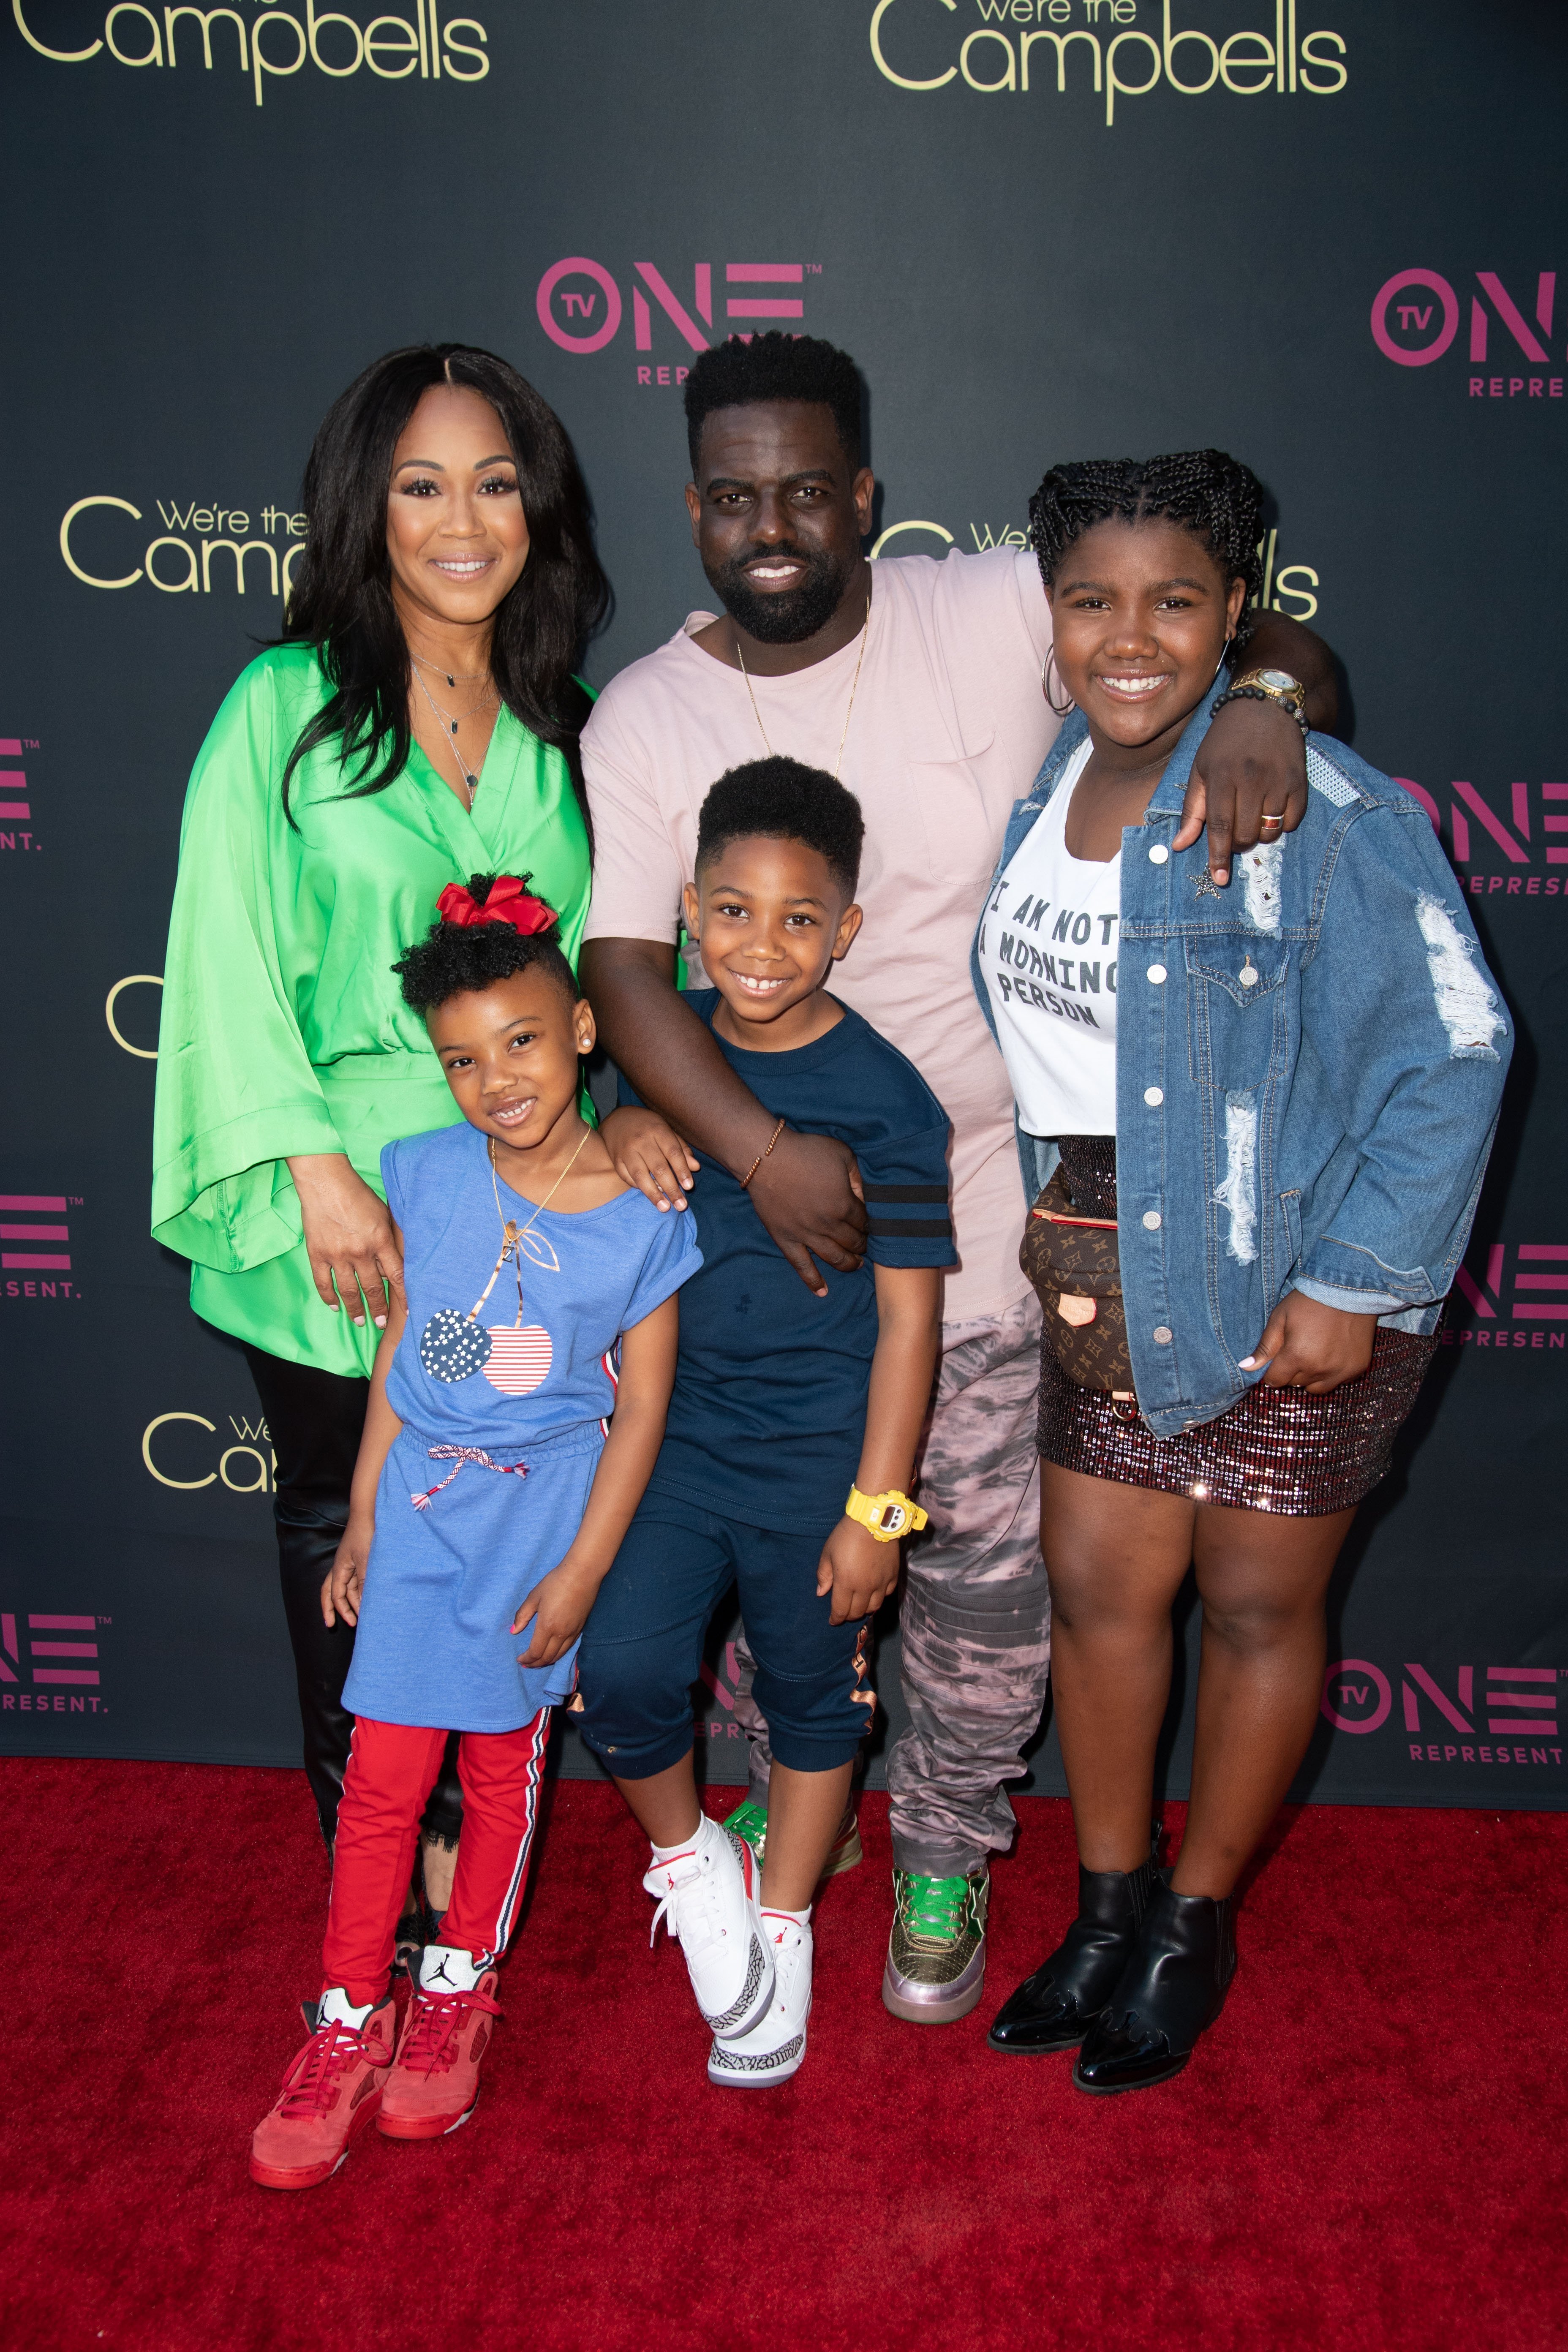 Erica & Warryn Campbell with their kids at "We're The Campbells" Special Screening in California on June 11, 2018 | Photo: Getty Images